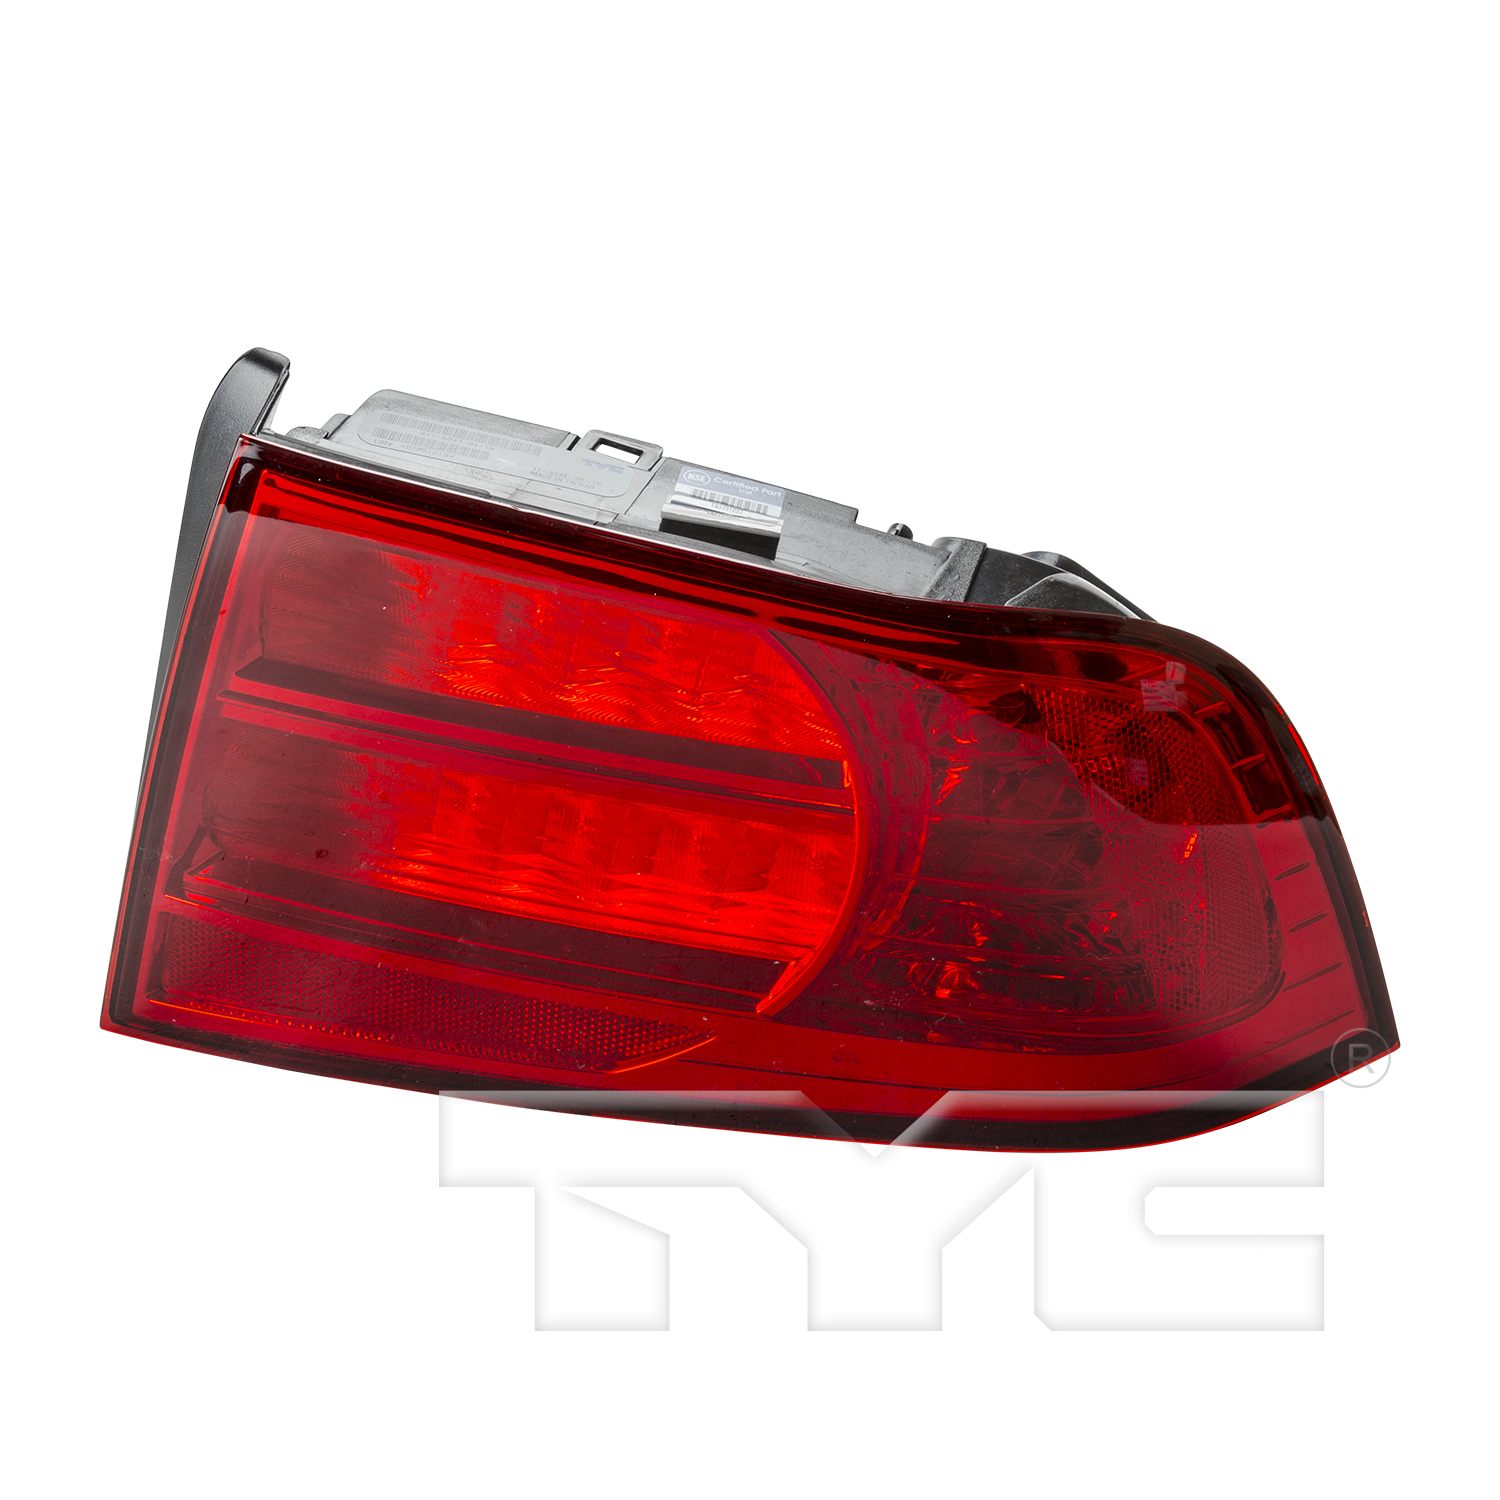 Aftermarket TAILLIGHTS for ACURA - TL, TL,04-06,RT Taillamp lens/housing